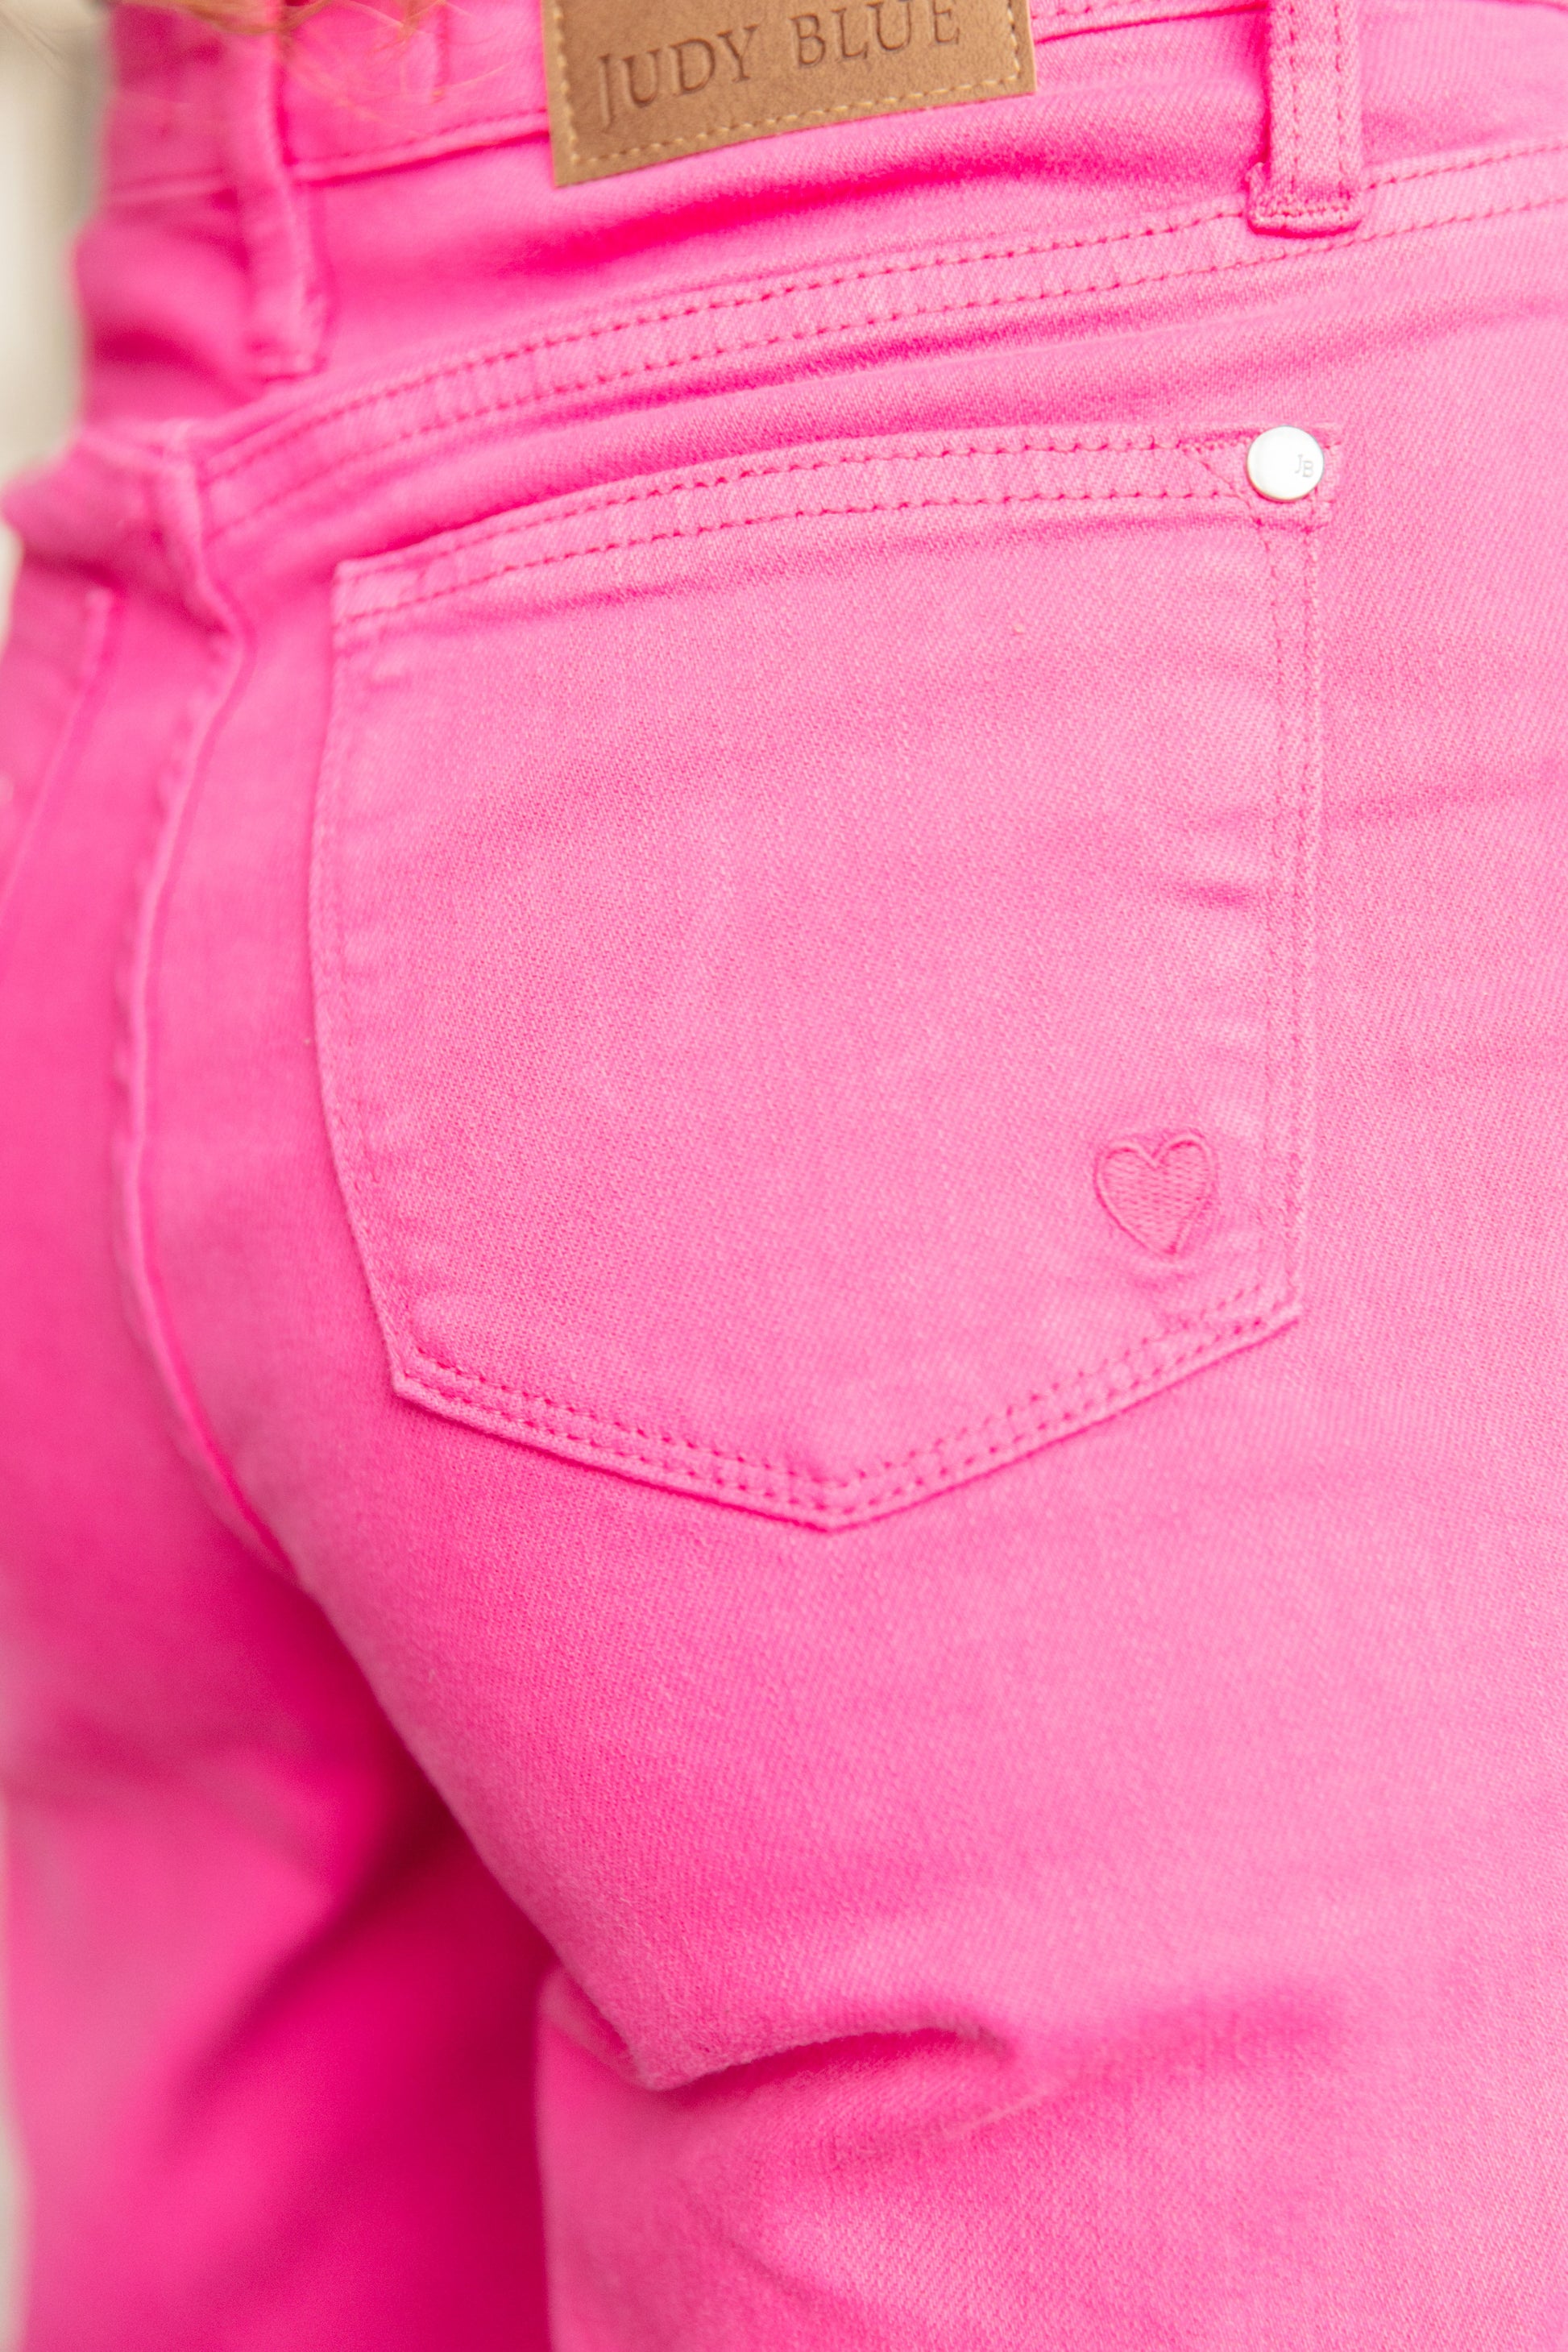  The bright pink garment dye adds a fun pop of color, and the adorable pink heart embroidered on the back pocket adds a touch of charm. Finished with a raw hem for an effortlessly cool look. Elevate your denim game with these must-have jeans.  Judy Blue 0 - 24W